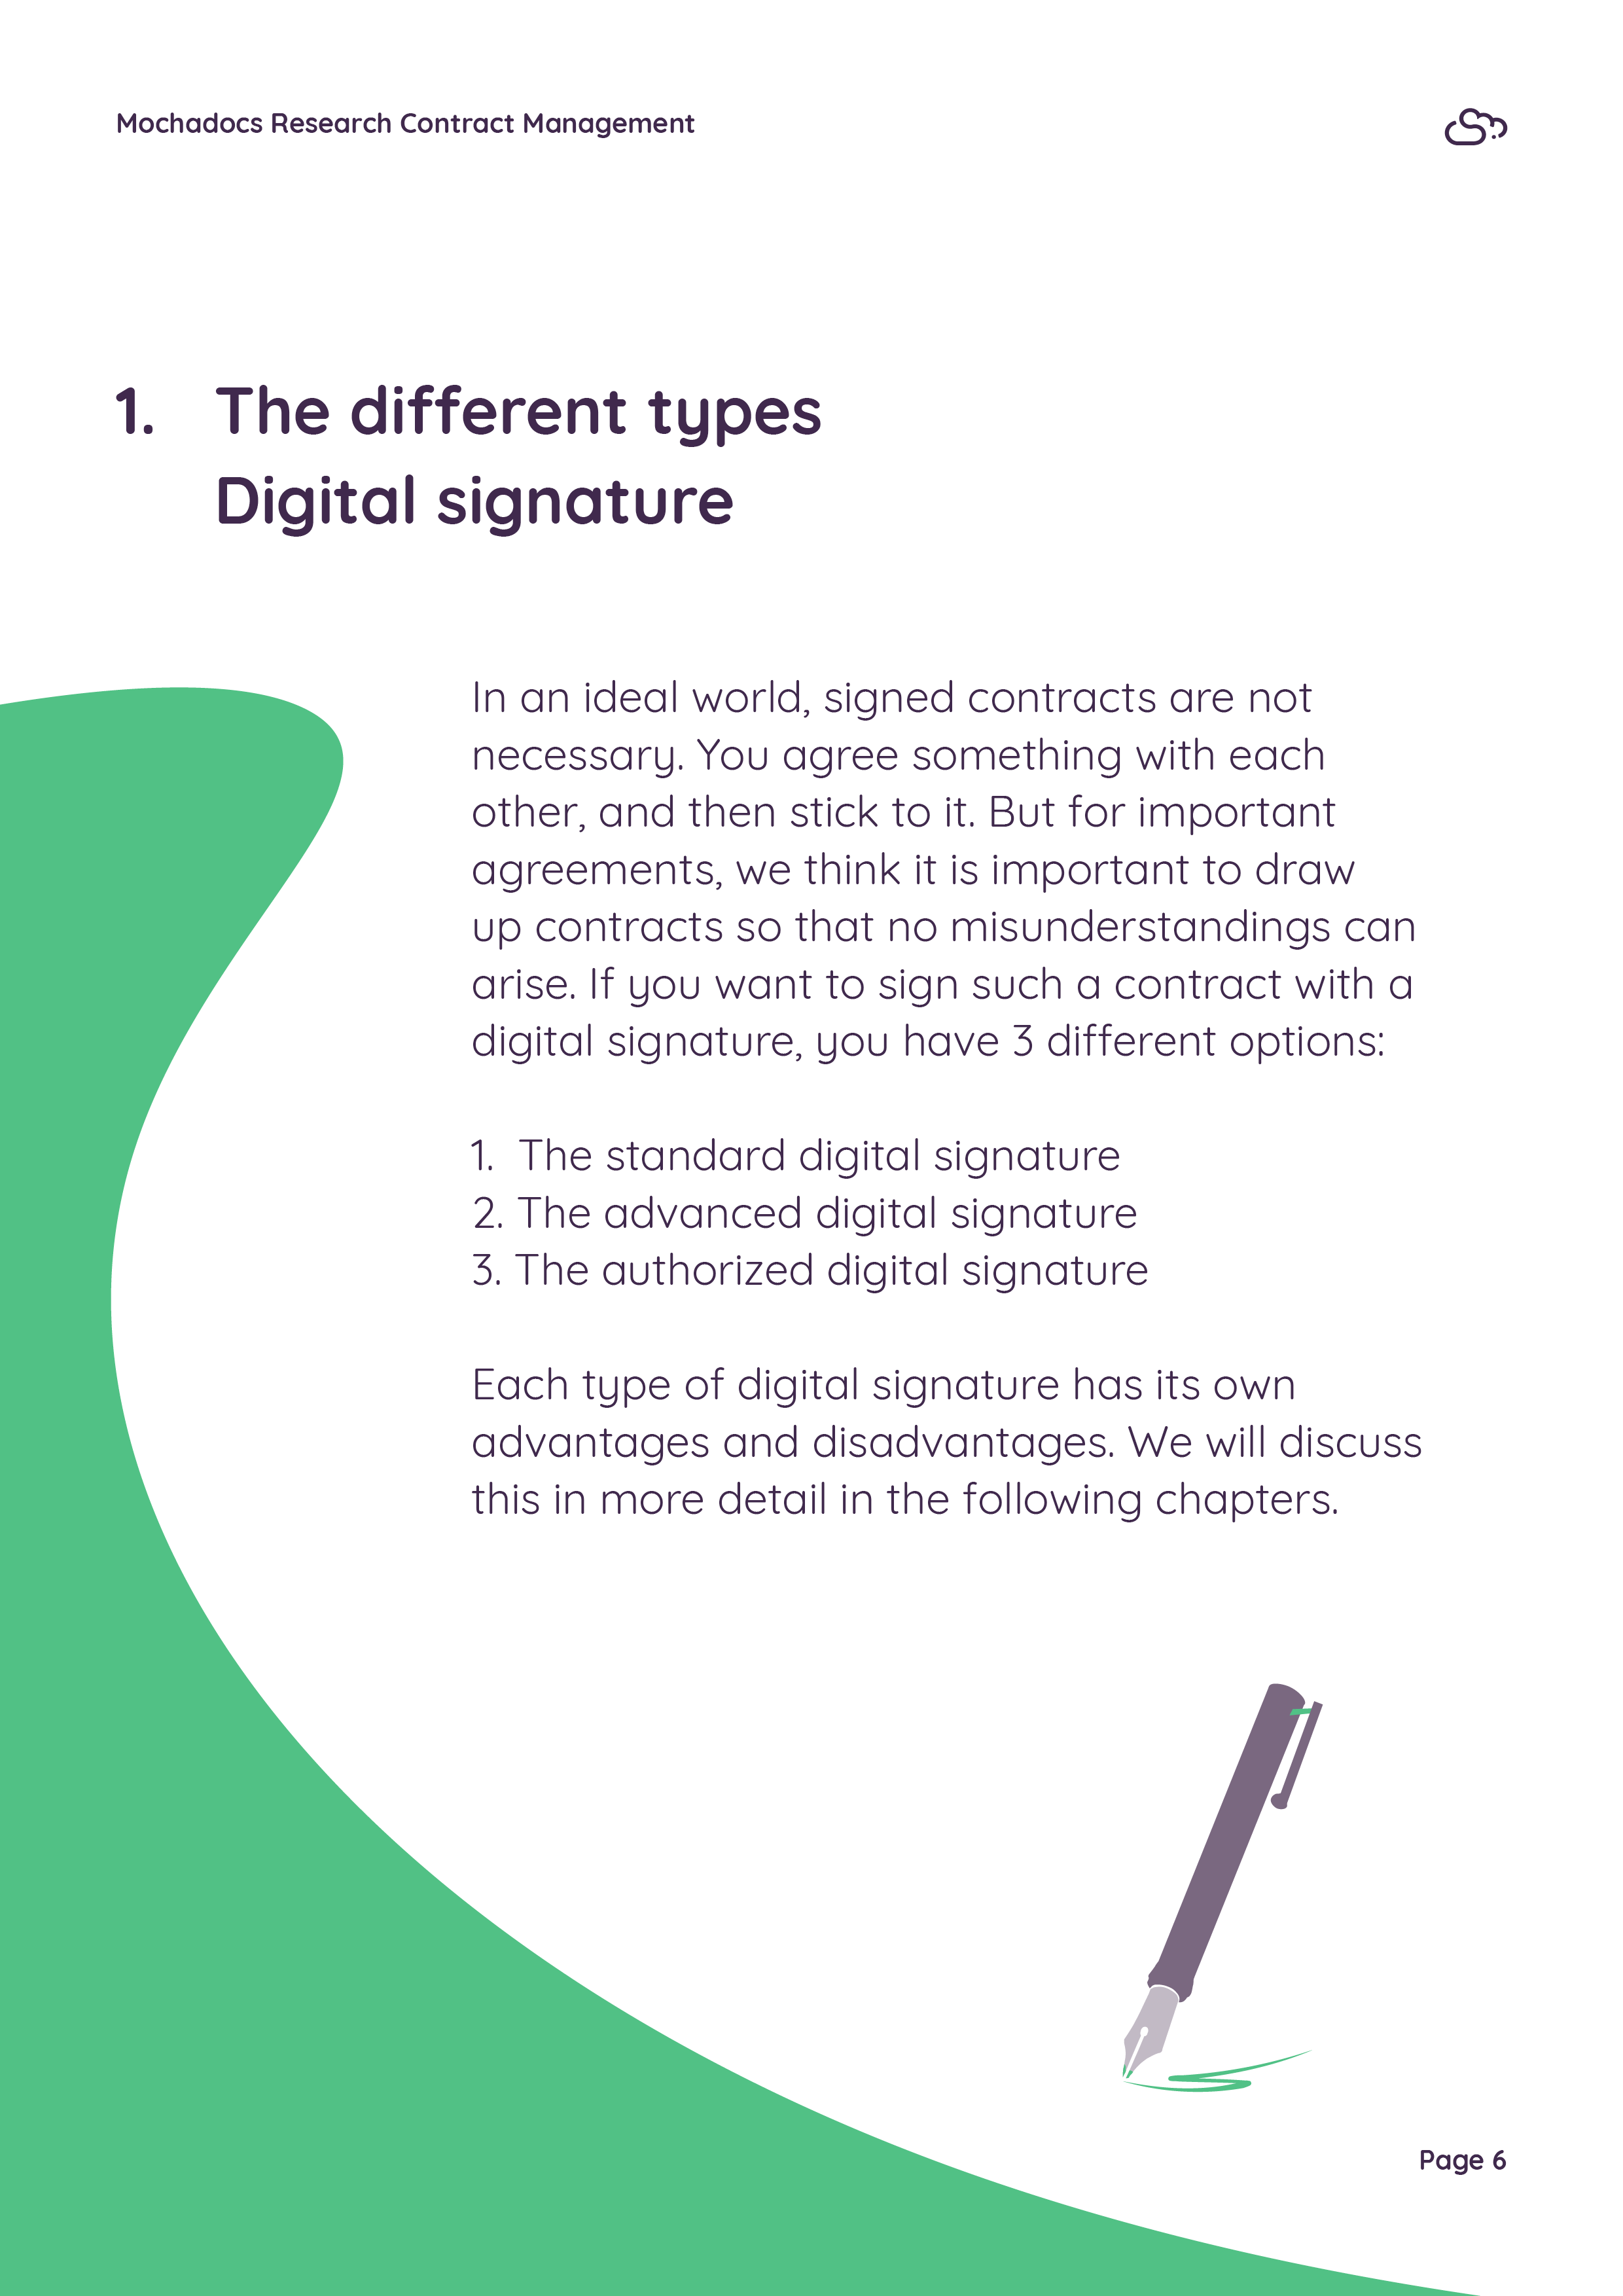 The 3 Types of Digital Signatures6